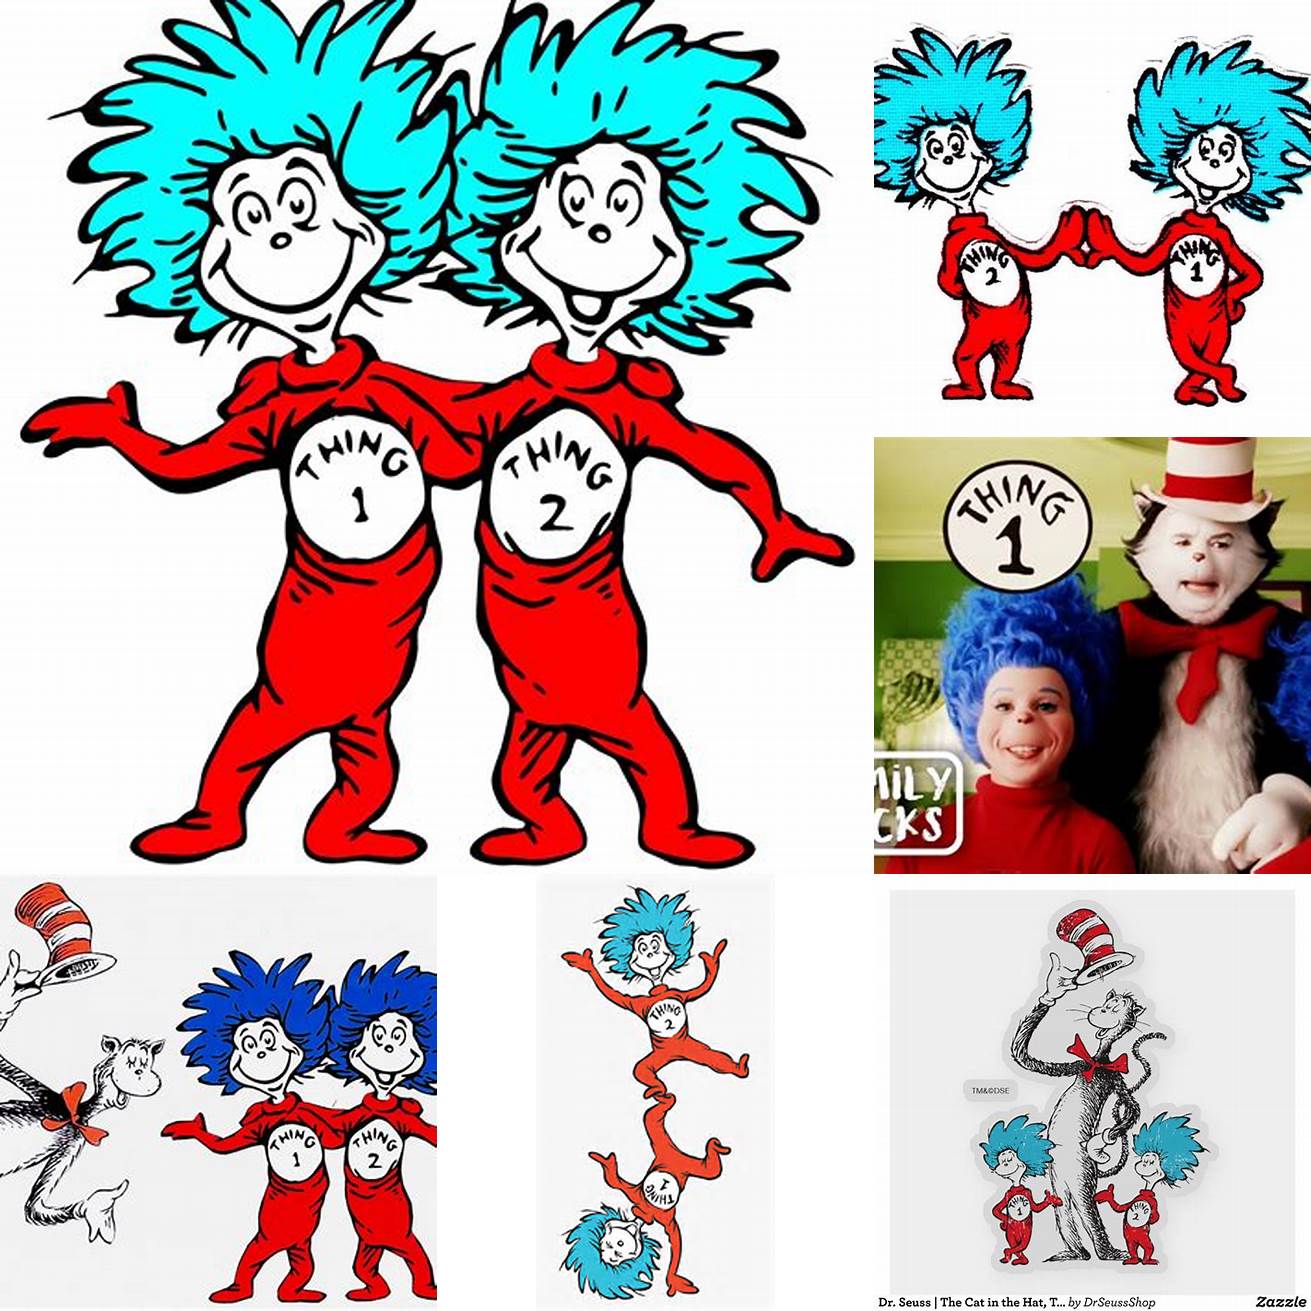 The Cat in the Hat holding Thing 1 and Thing 2